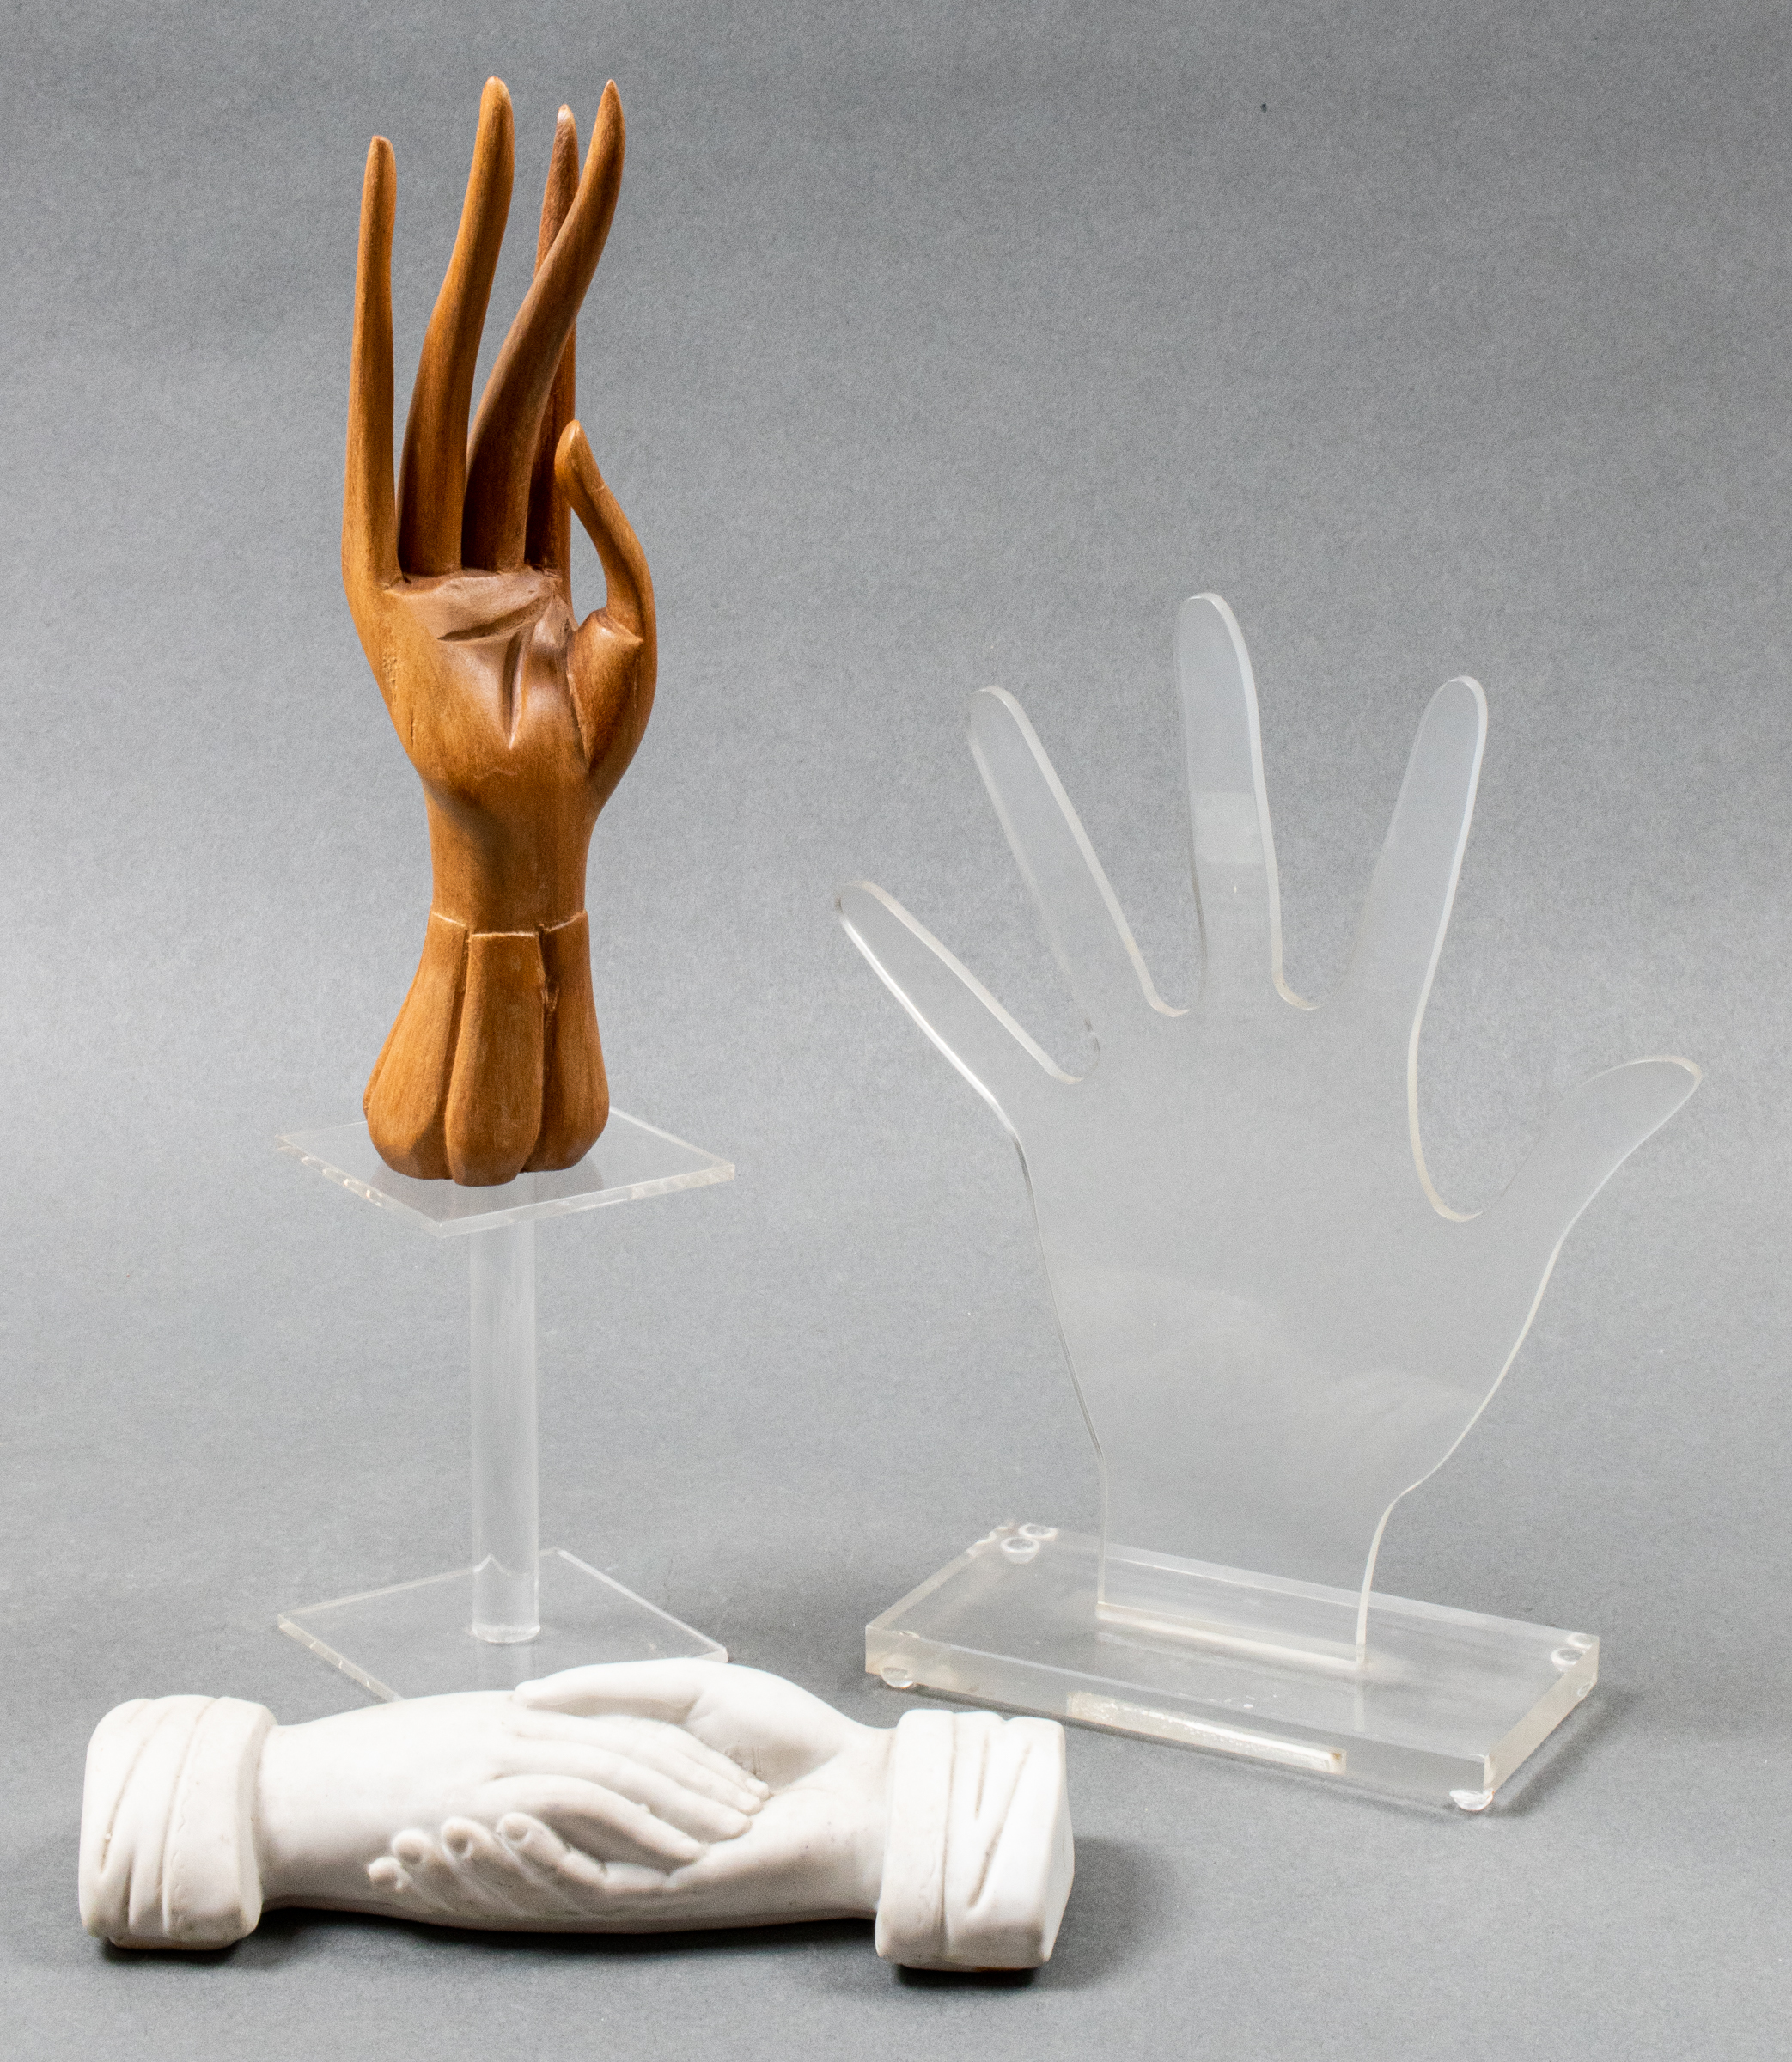 COLLECTION OF HAND SCULPTURES  3c318e